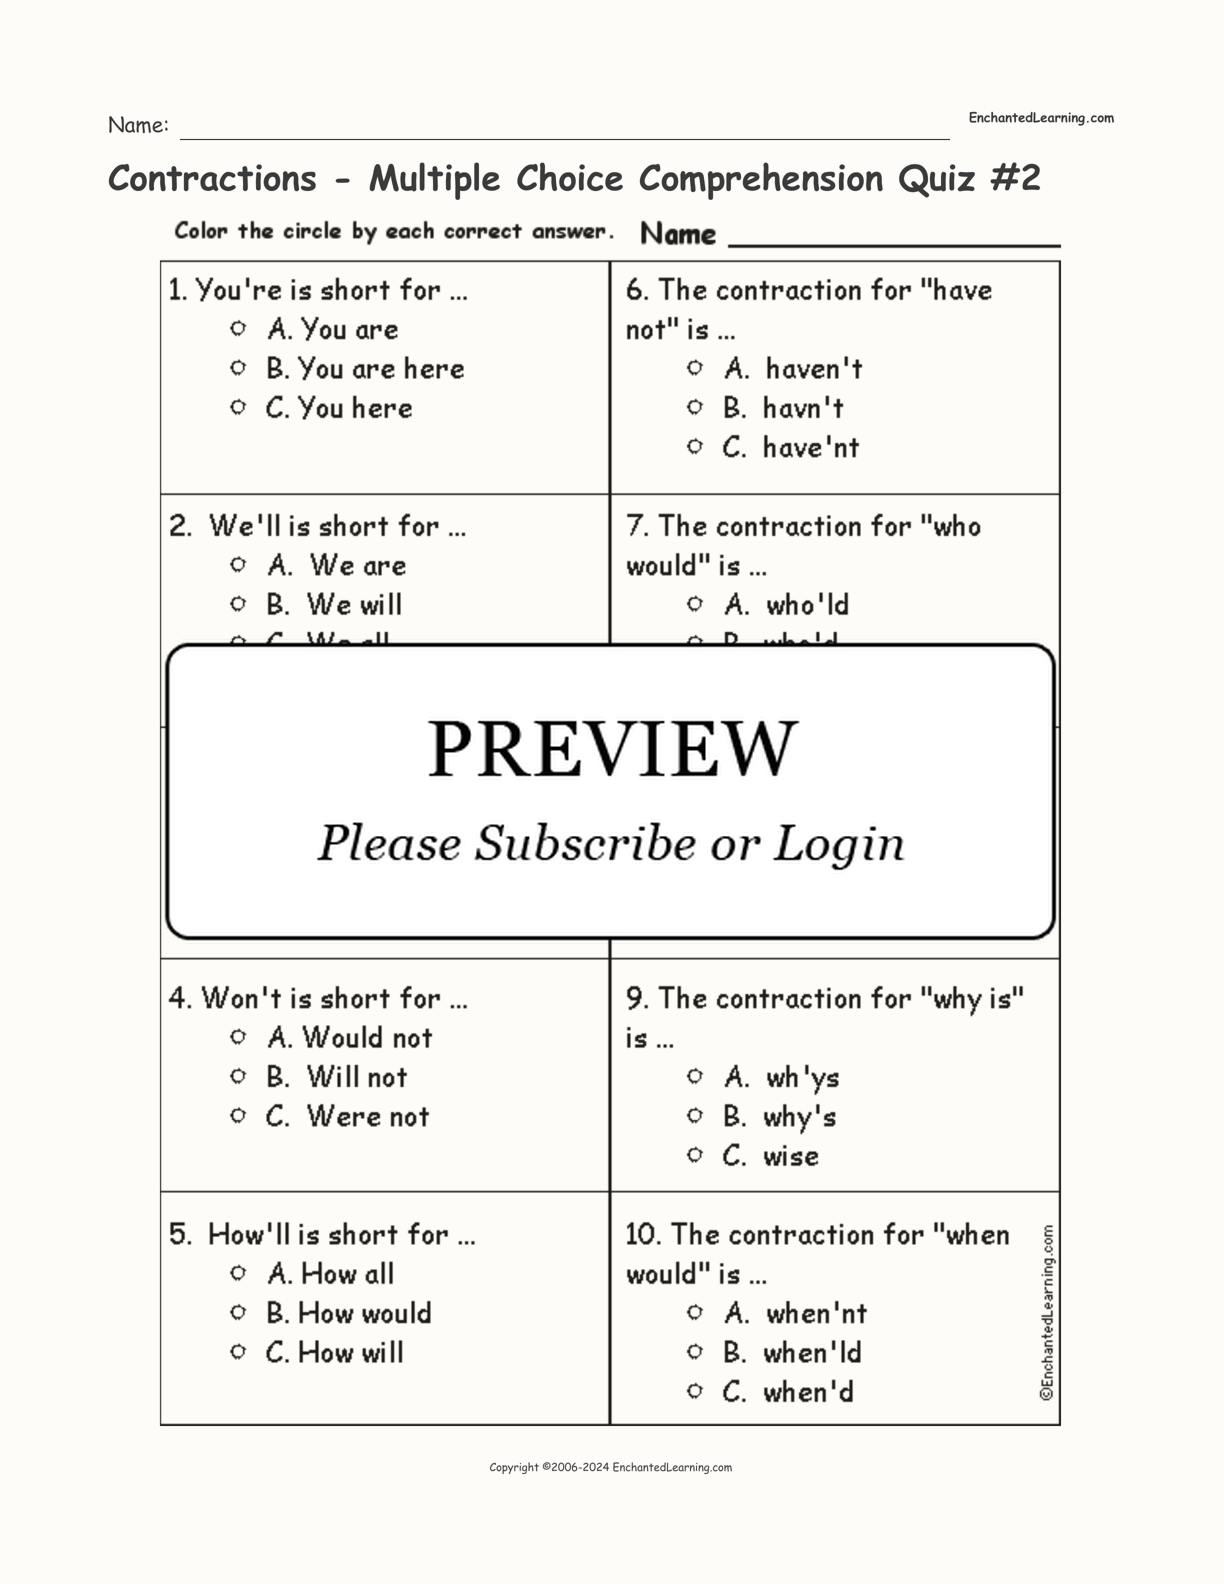 Contractions - Multiple Choice Comprehension Quiz #2 interactive worksheet page 1